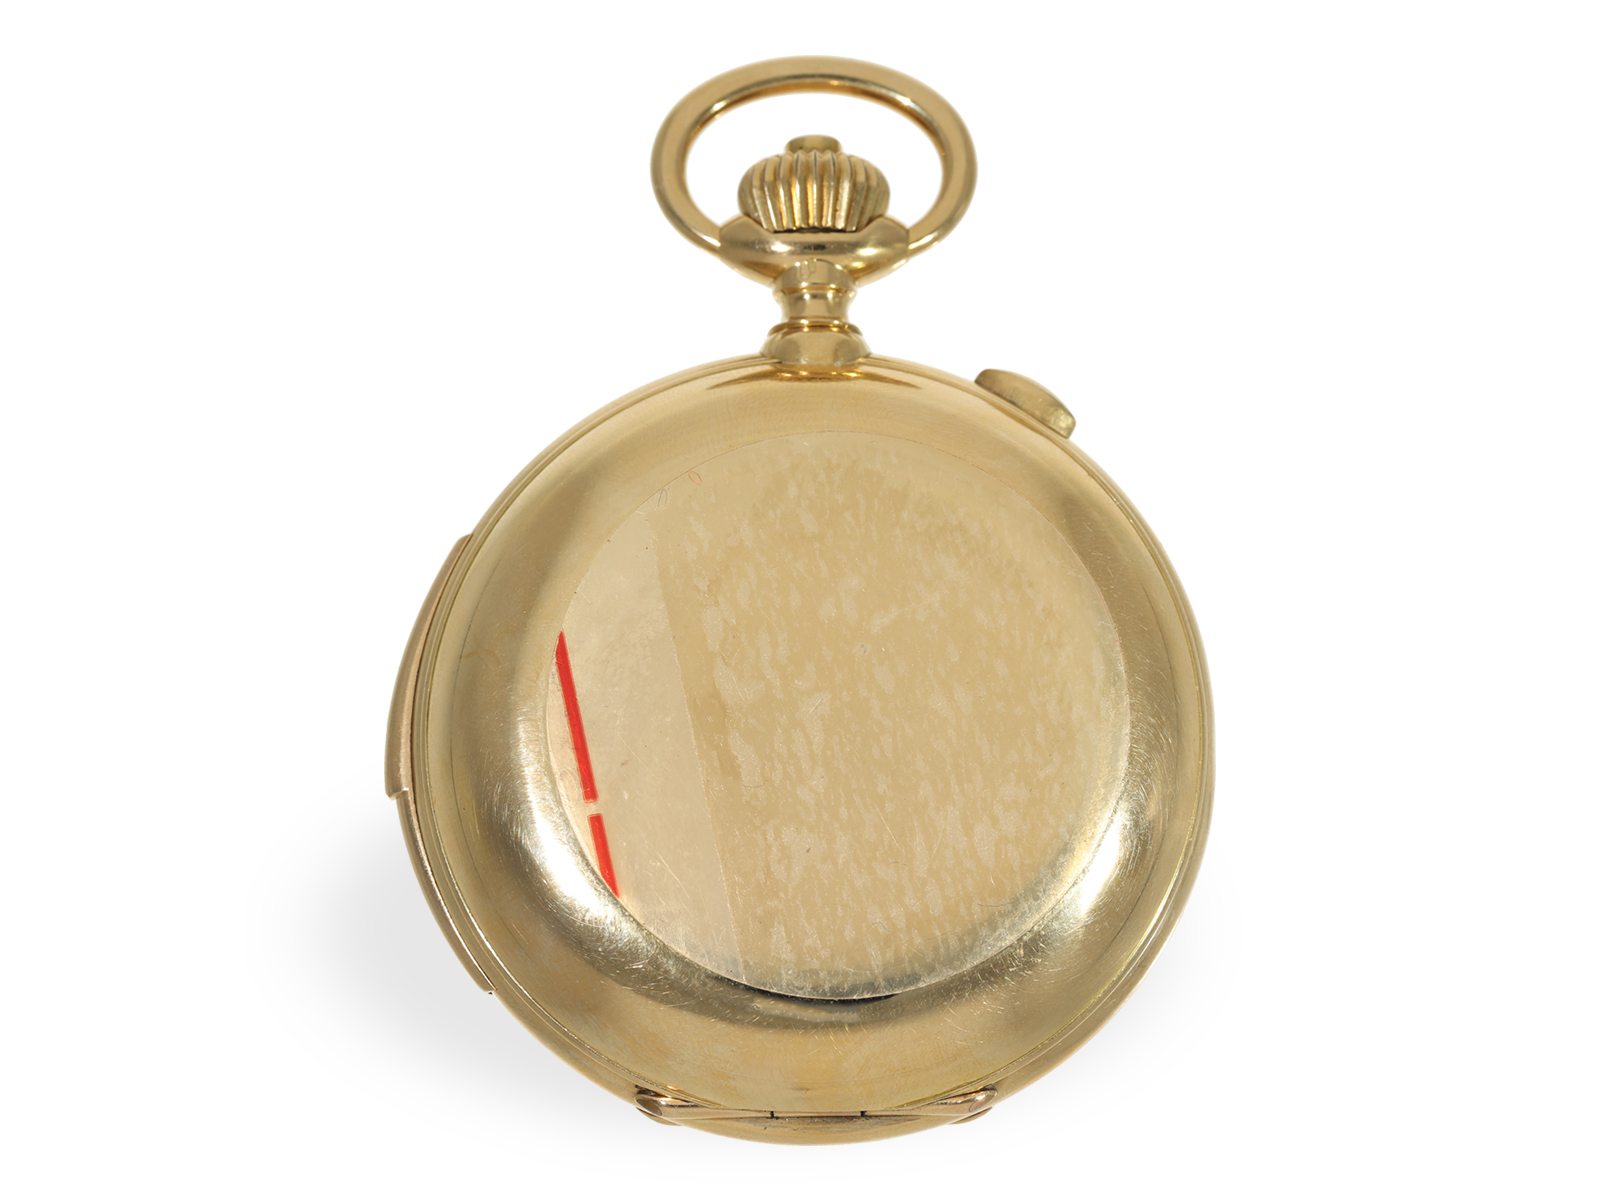 Pocket watch: heavy astronomical gold hunting case watch with 8 complications, C.Barbezat-Baillot, L - Image 7 of 7